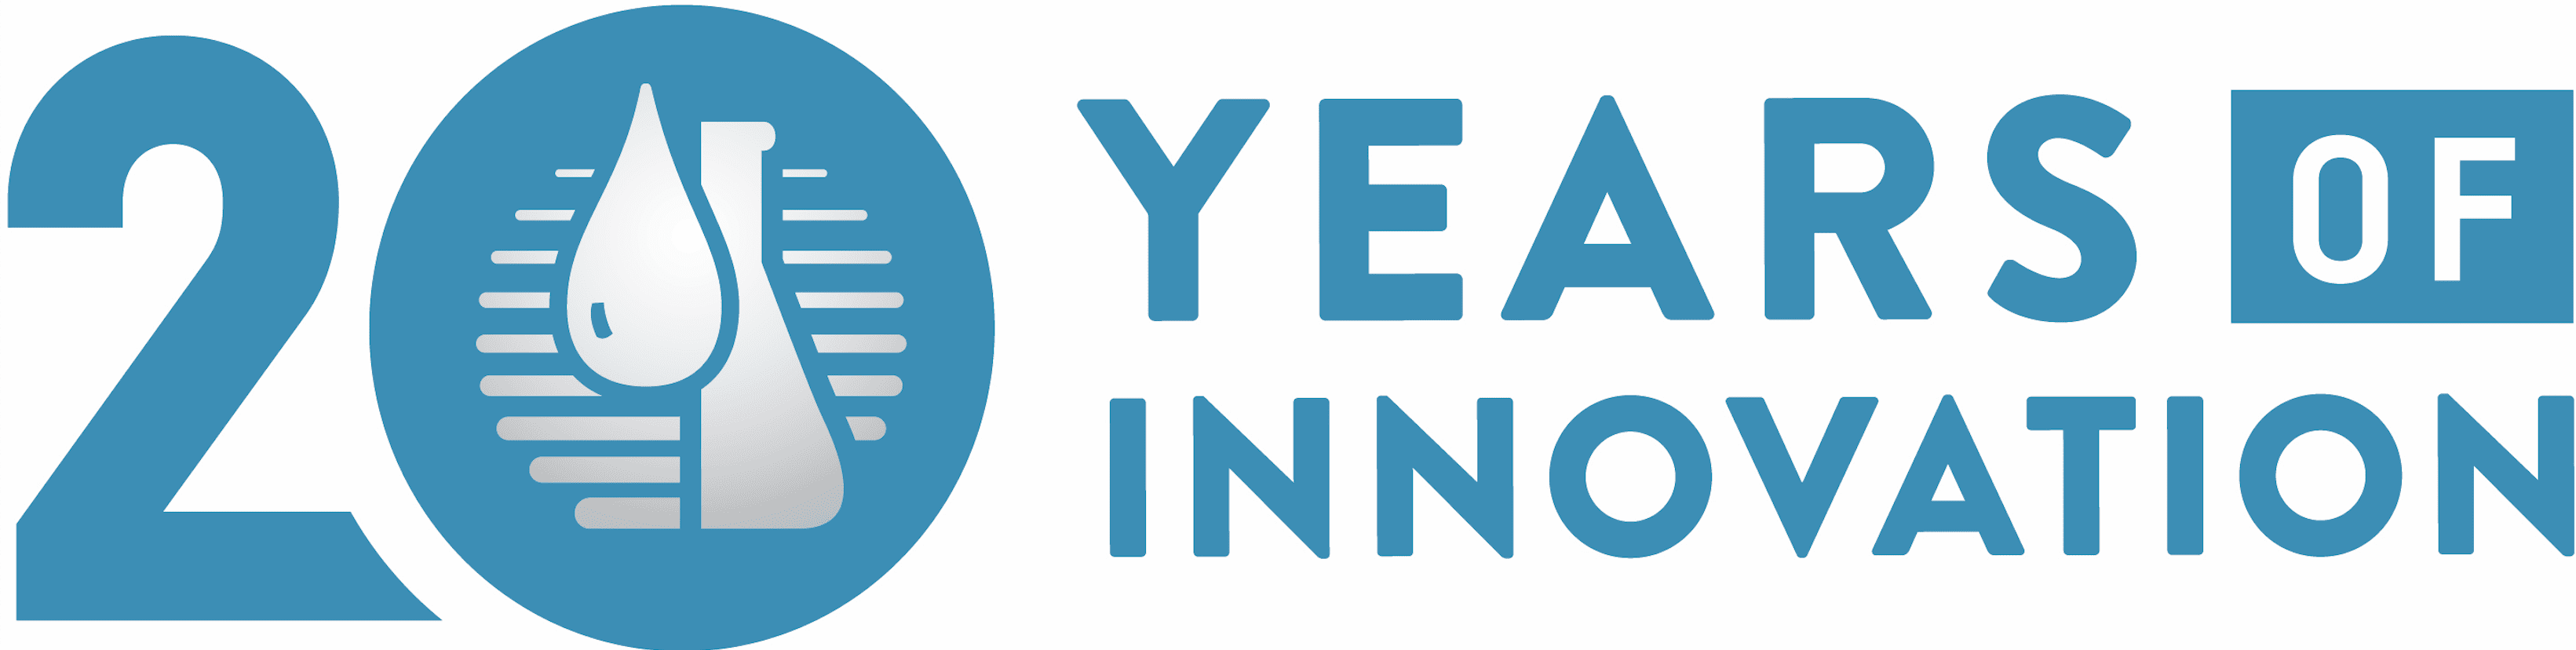 20 years of innovation